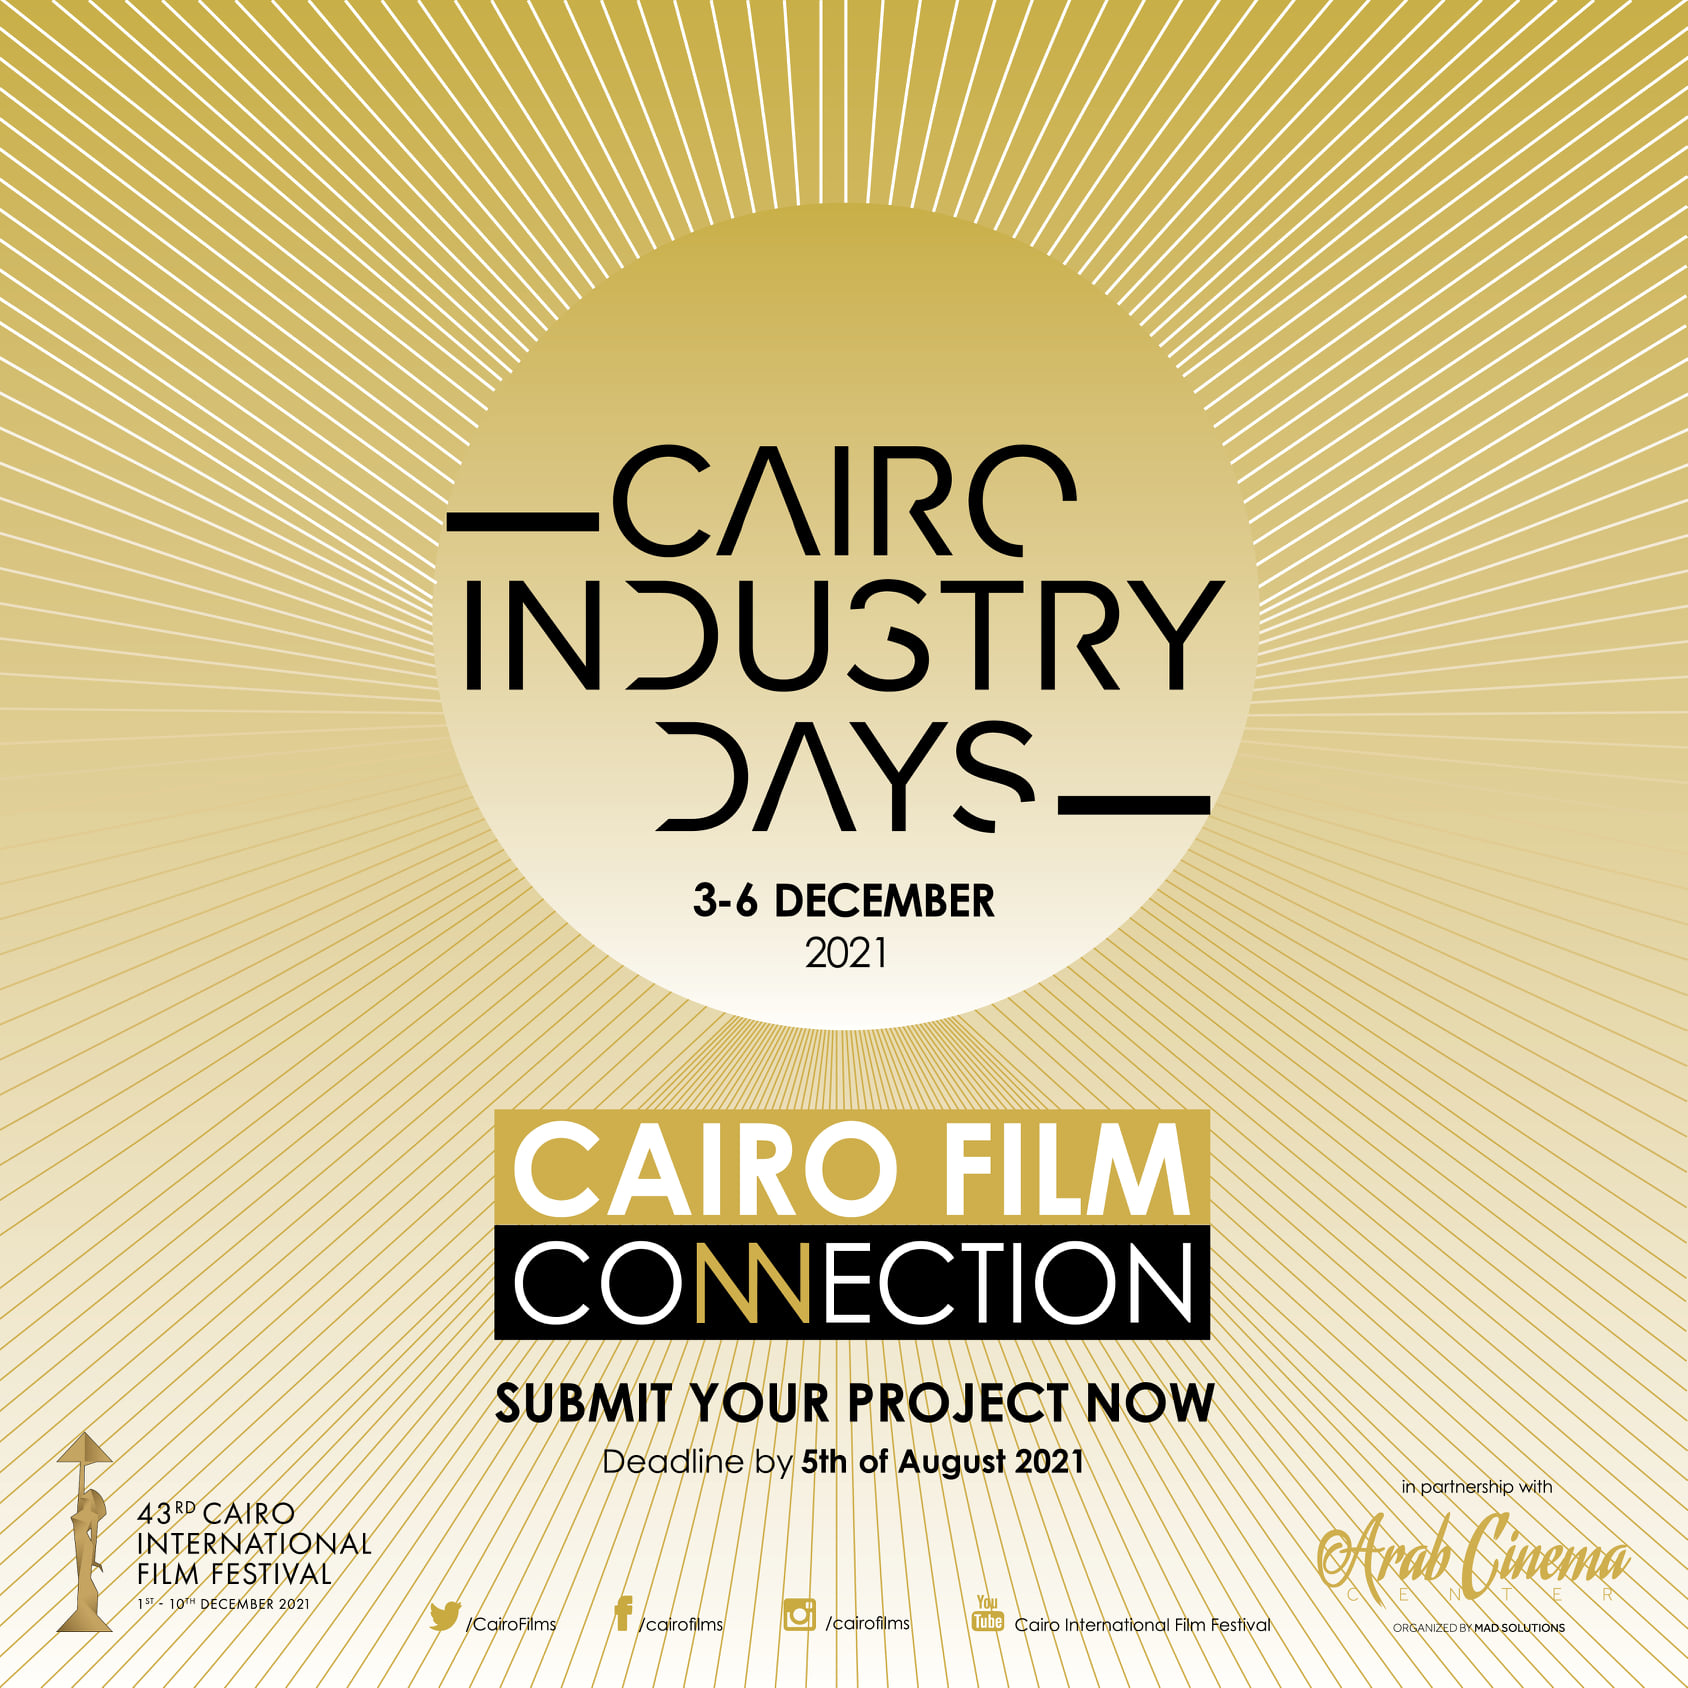 CAIRO FILM CONNECTION OPENS CALL FOR SUBMISSIONS